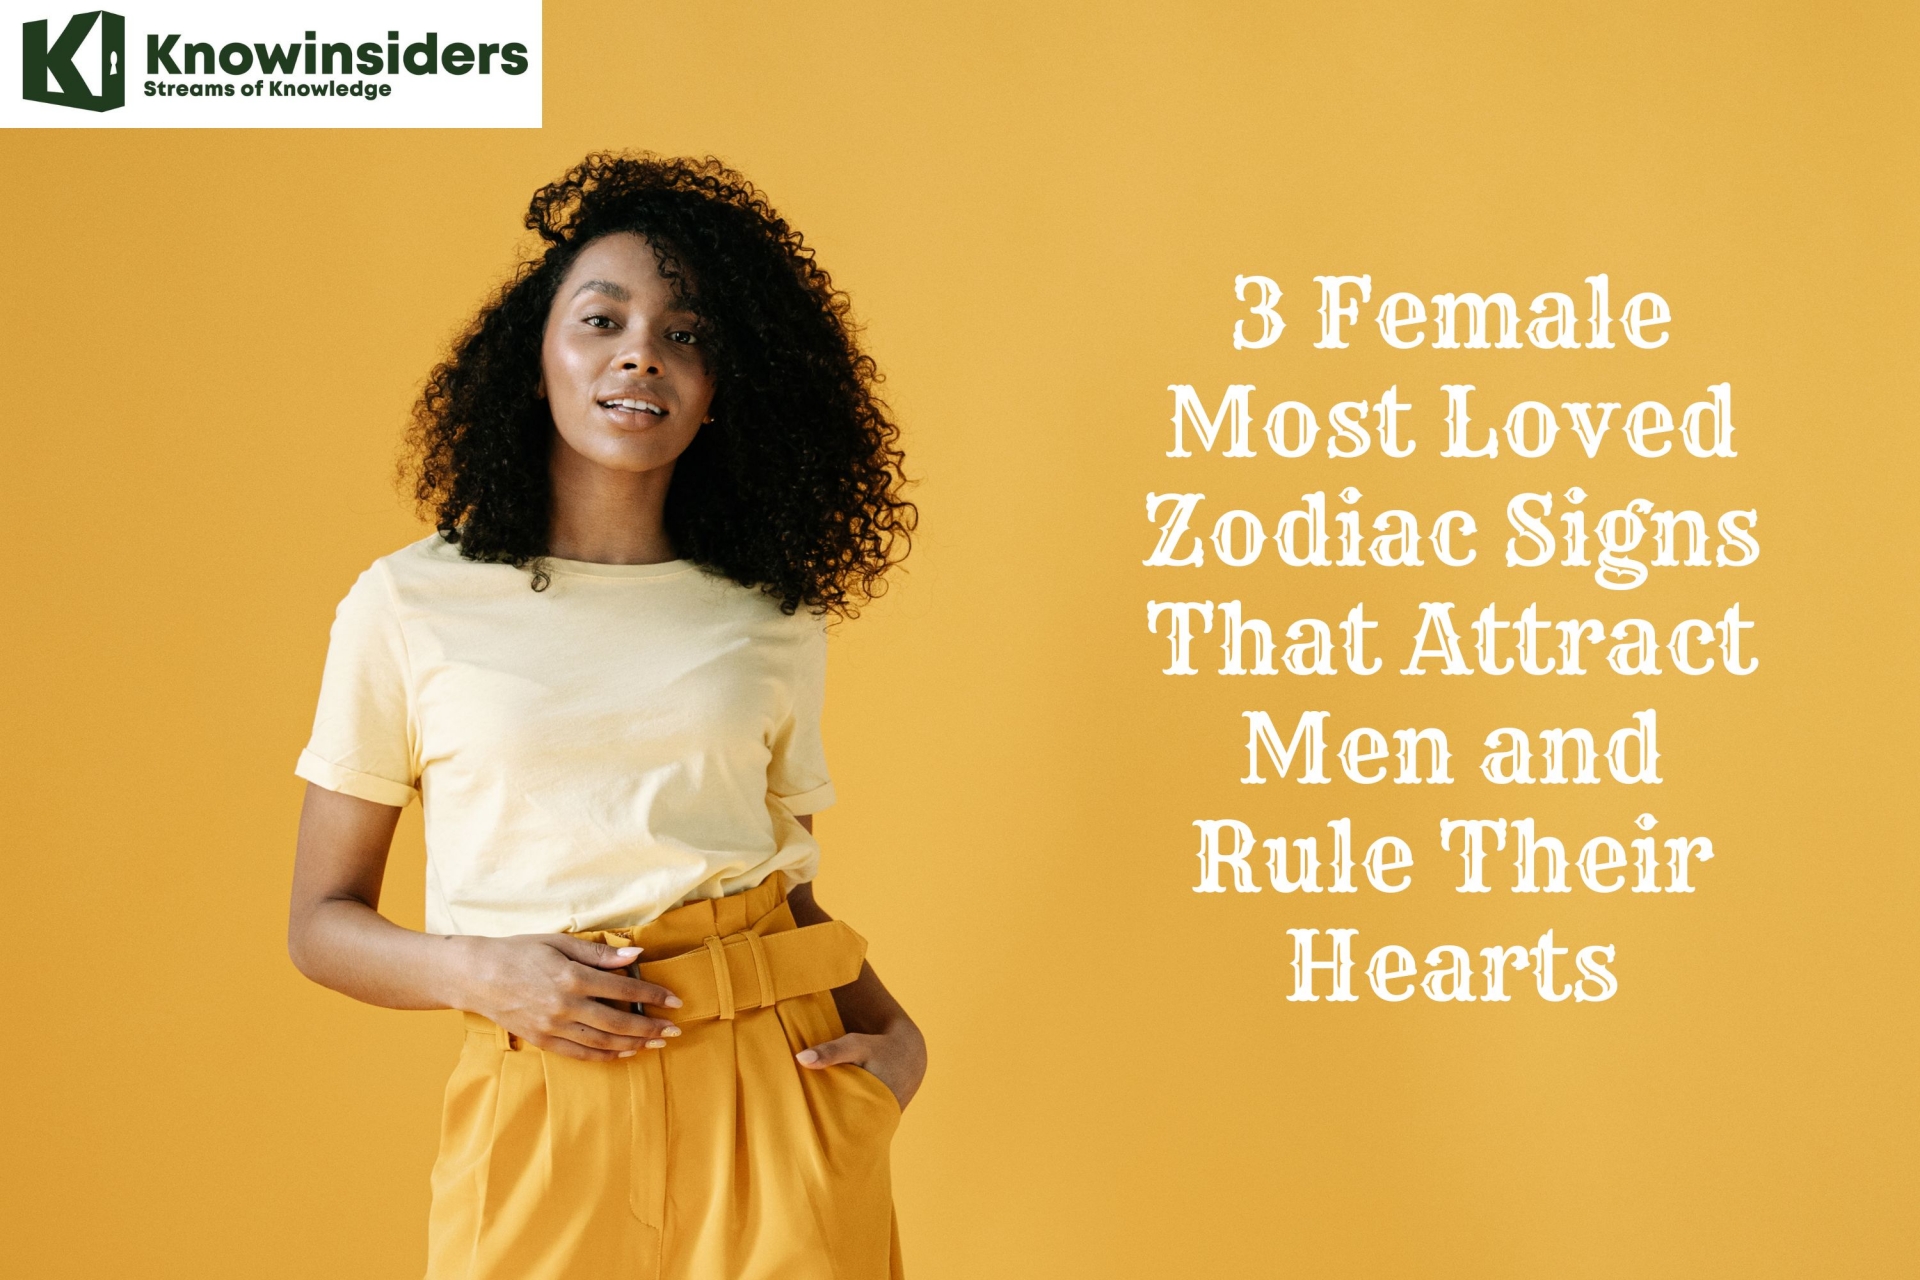 Top 3 Female Most Loved Zodiac Signs That Attract Men and Rule Their Hearts